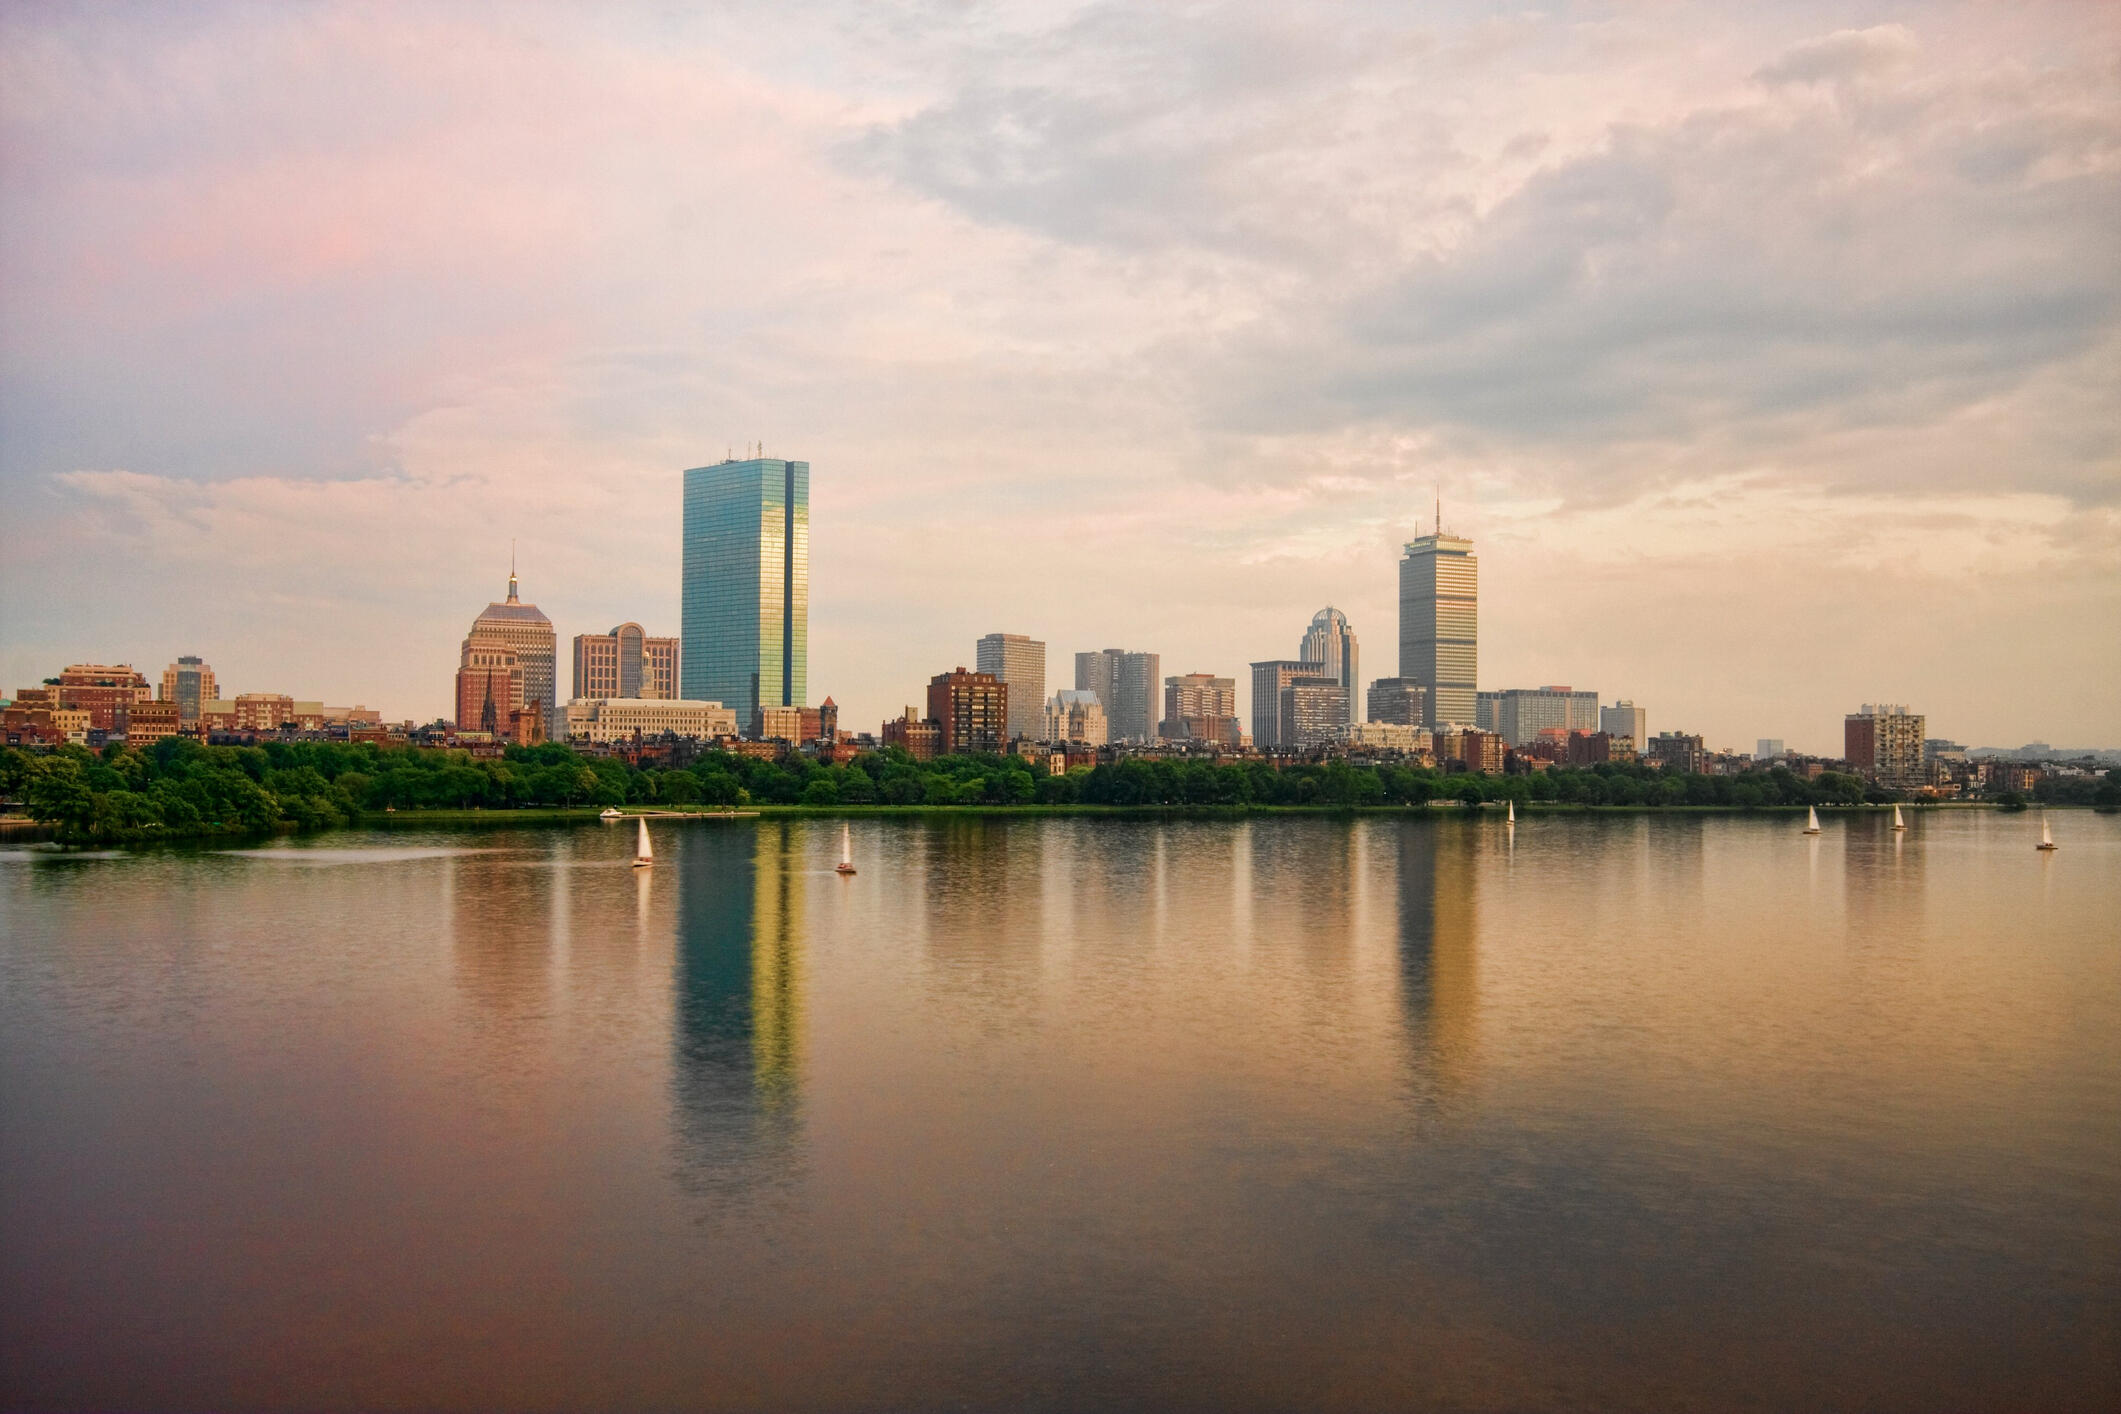 Skyline of Boston Back Bay including John Hancock Tower and Prudential Tower with Charles River in the foreground. Shot during sunset from Longfellow Bridge.